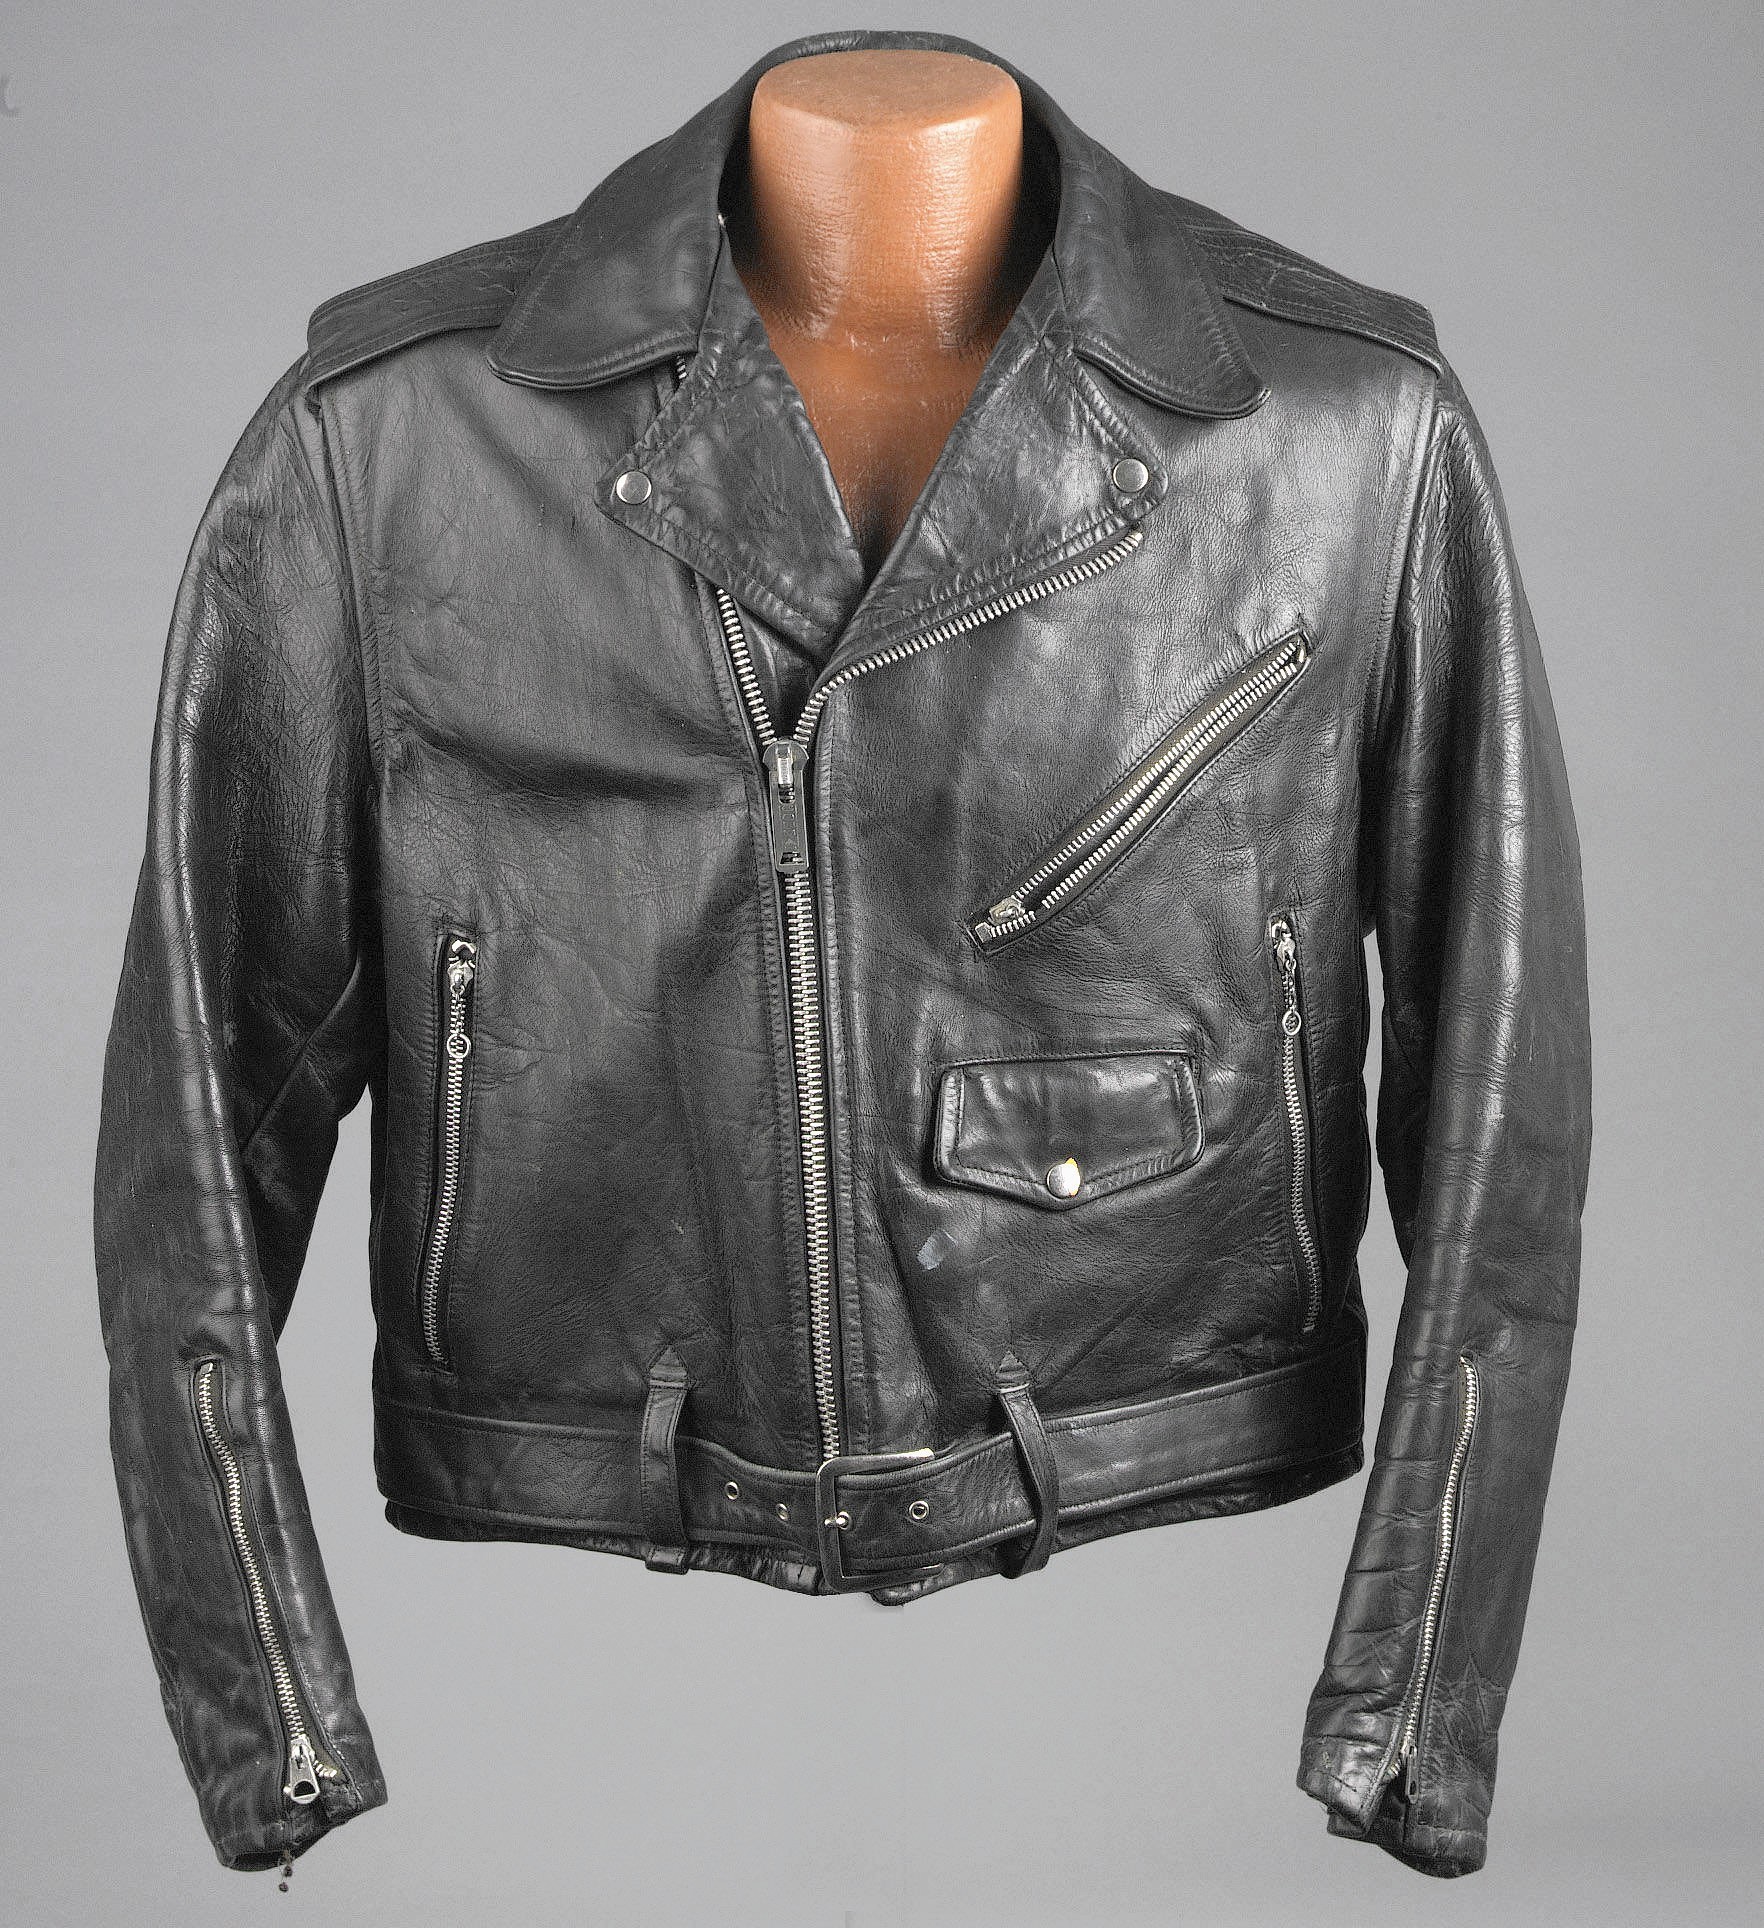 Probing the legacy of the motorcycle jacket - Daily Press